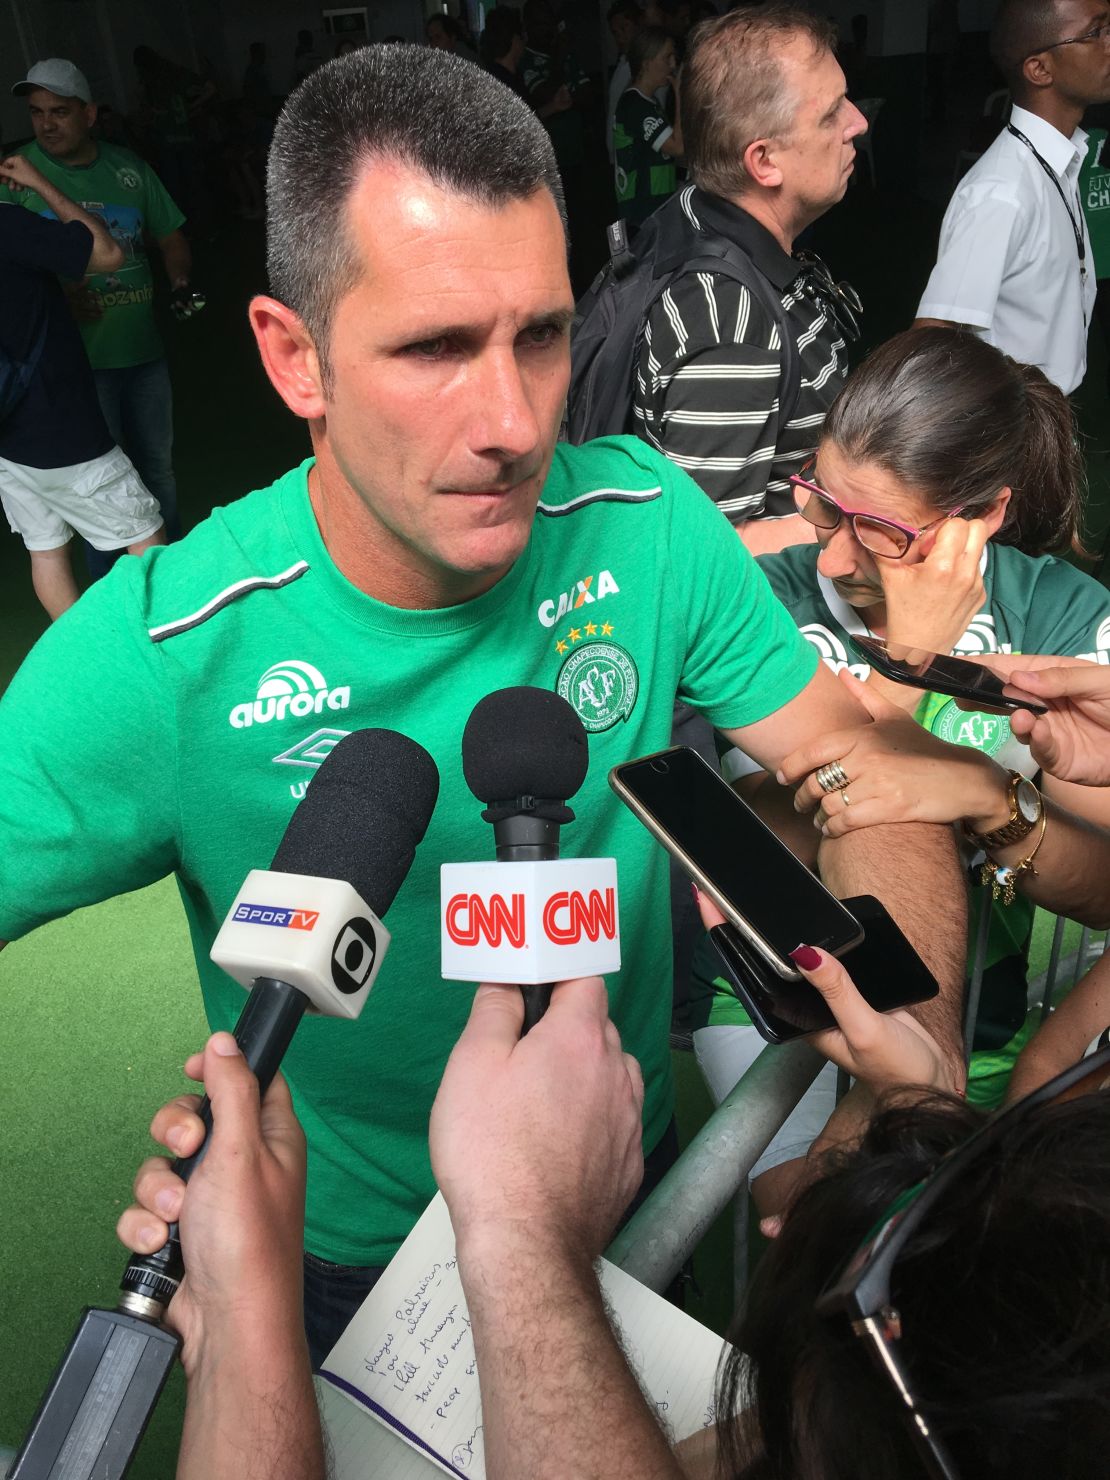 Nivaldo was consoled by his sister as he met reporters at Chapecoense's stadium in the aftermath of the fatal crash.